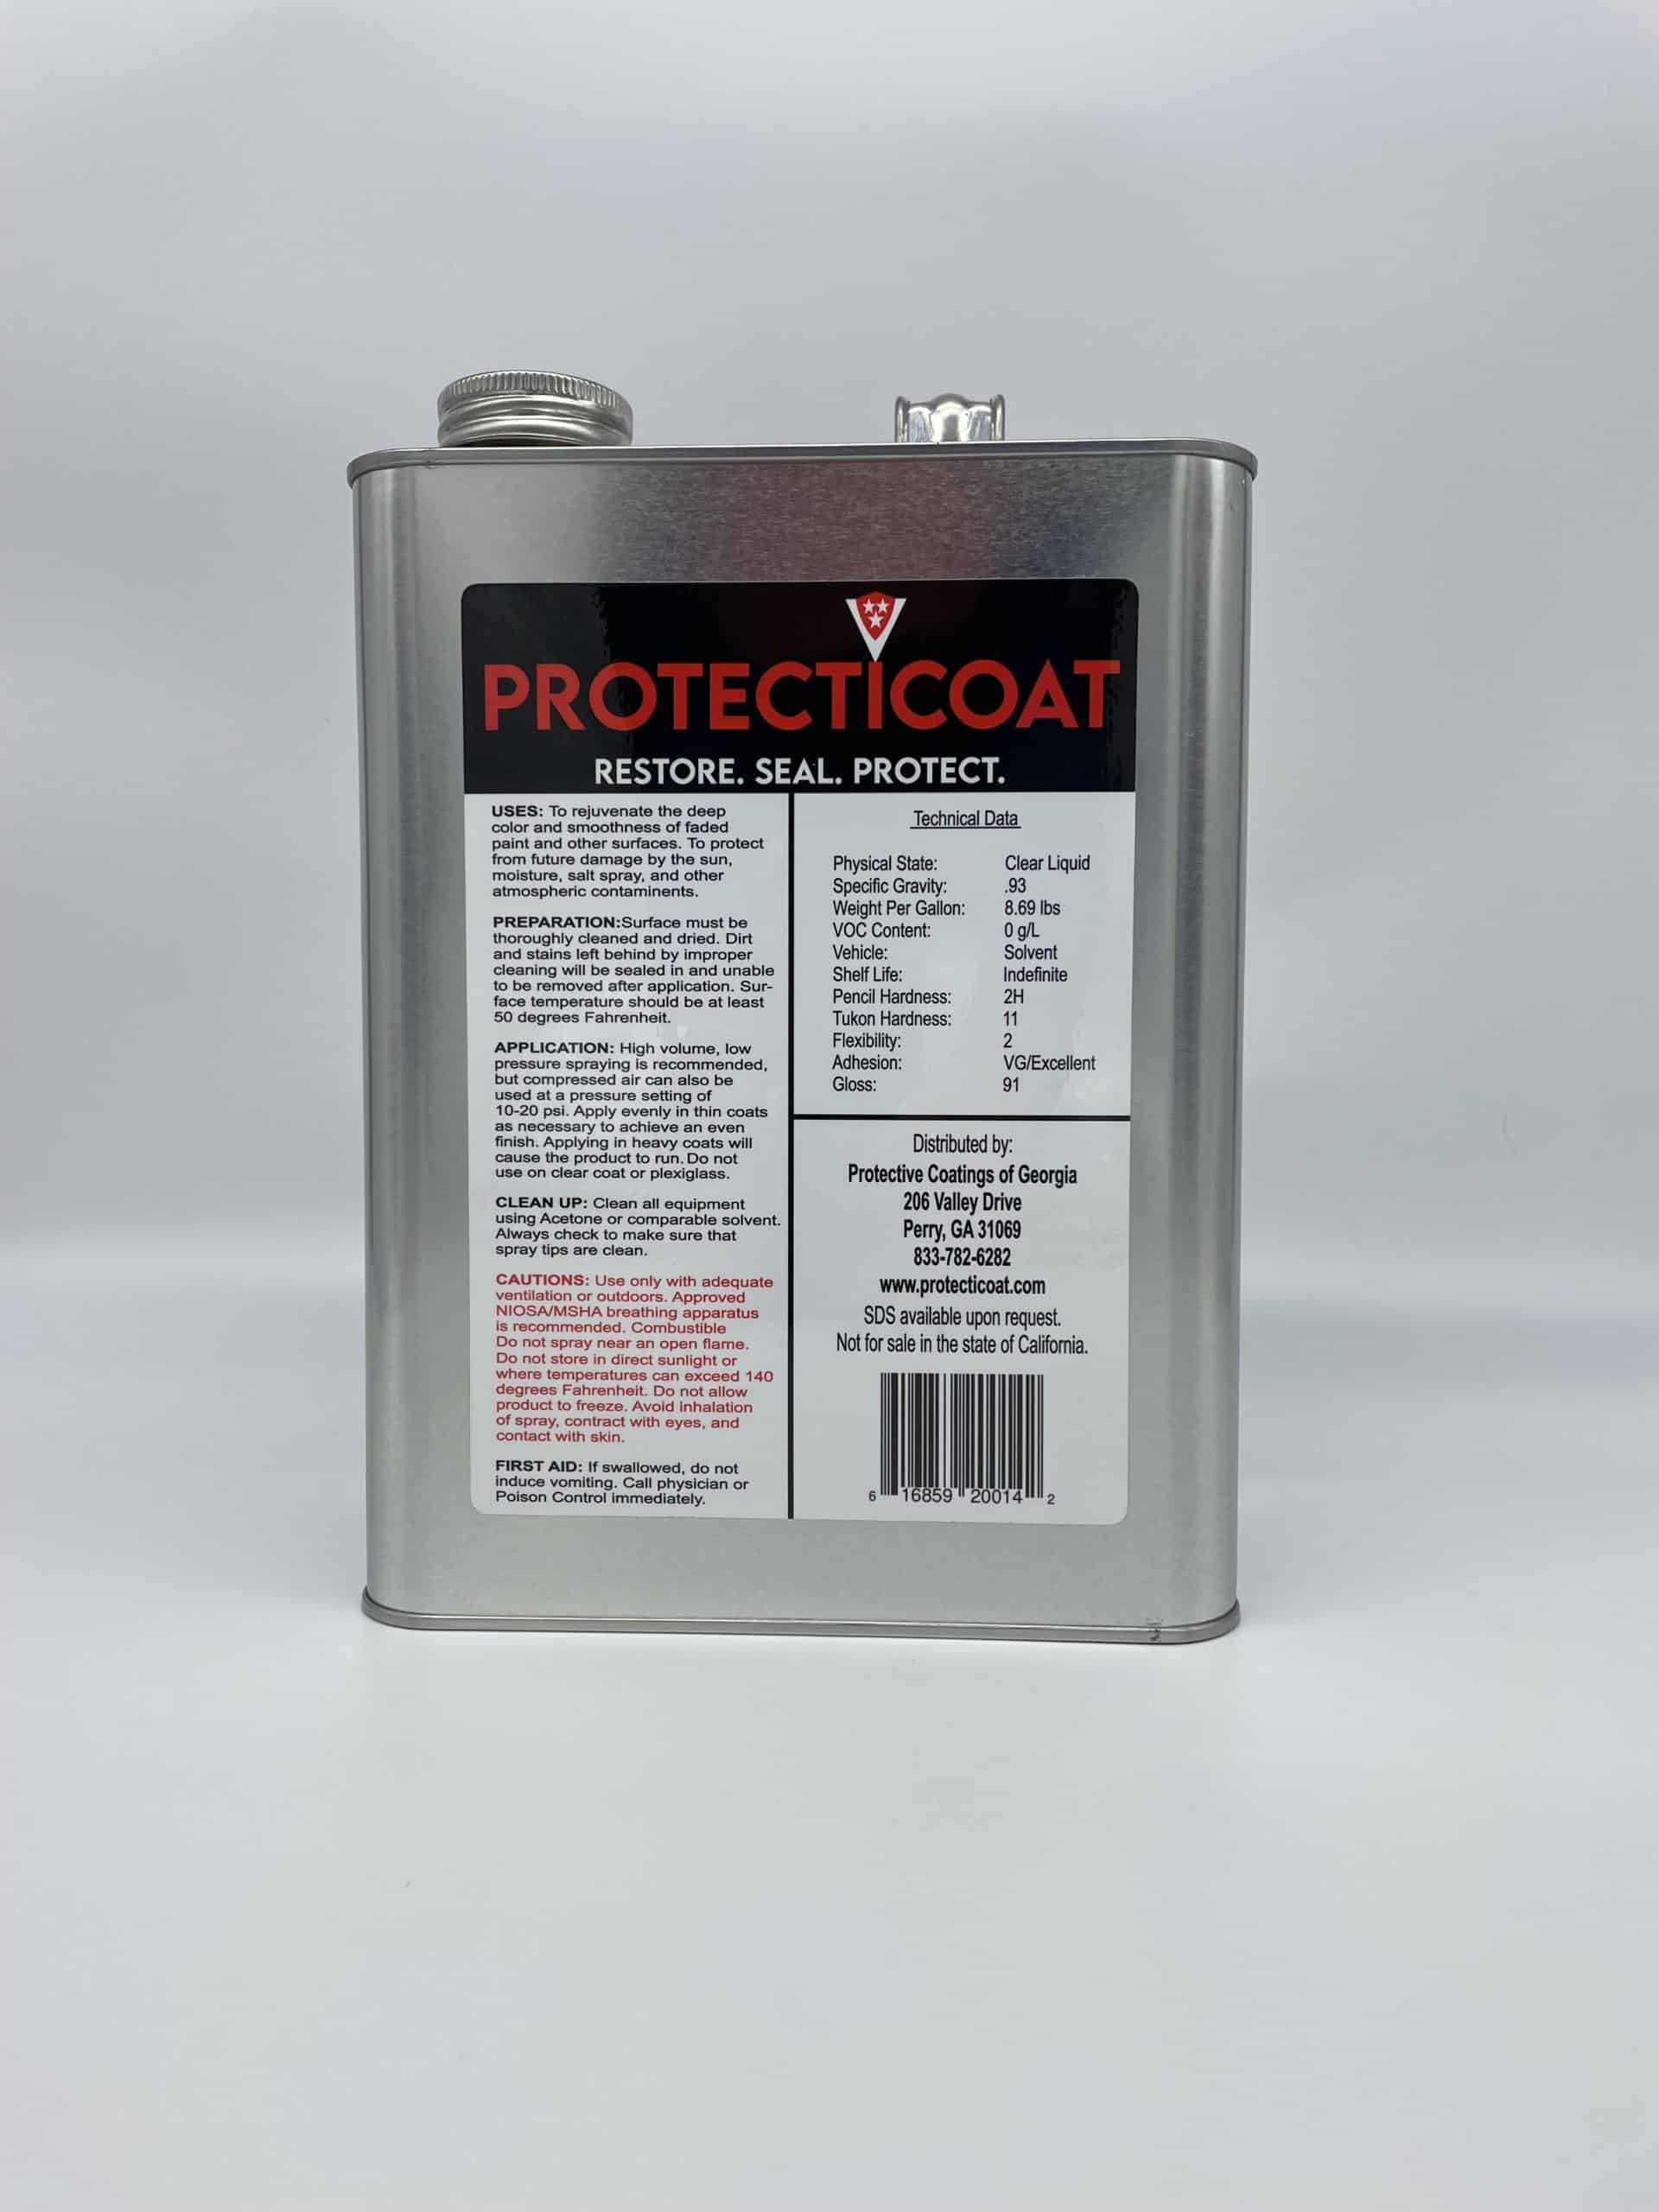 Container of Protecticoat